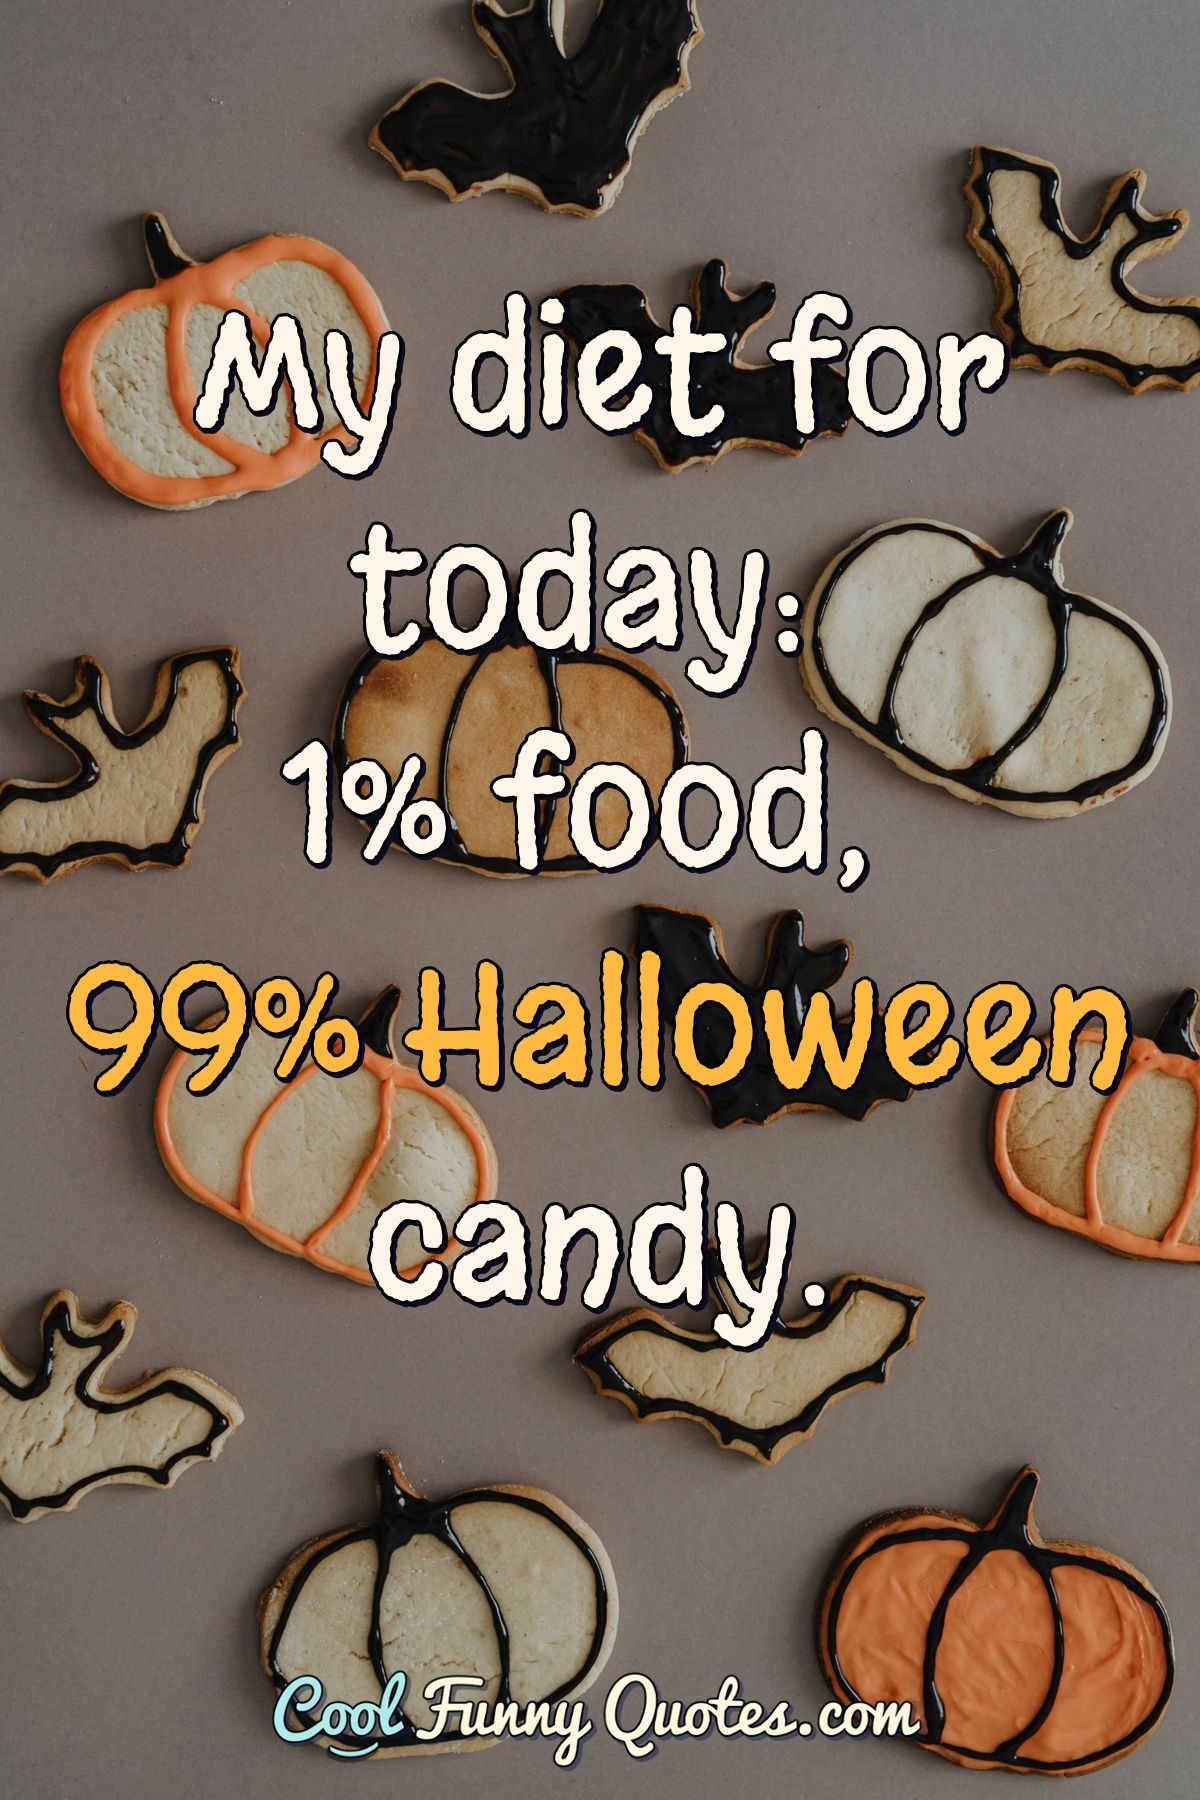 My diet for today: 1% food, 99% Halloween candy. - Anonymous